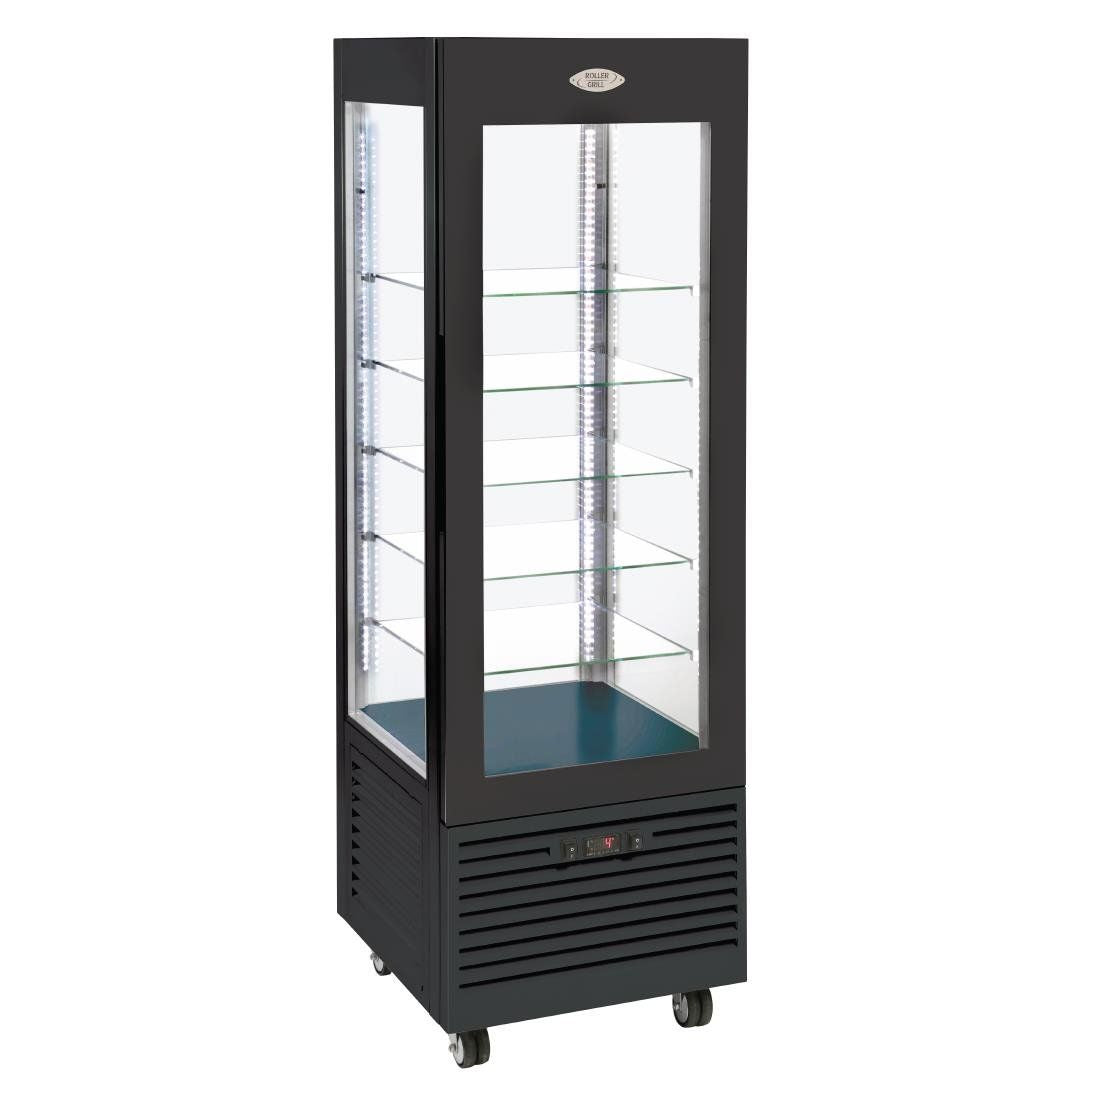 Roller Grill Display Fridge with Fixed Shelves Black - DT734